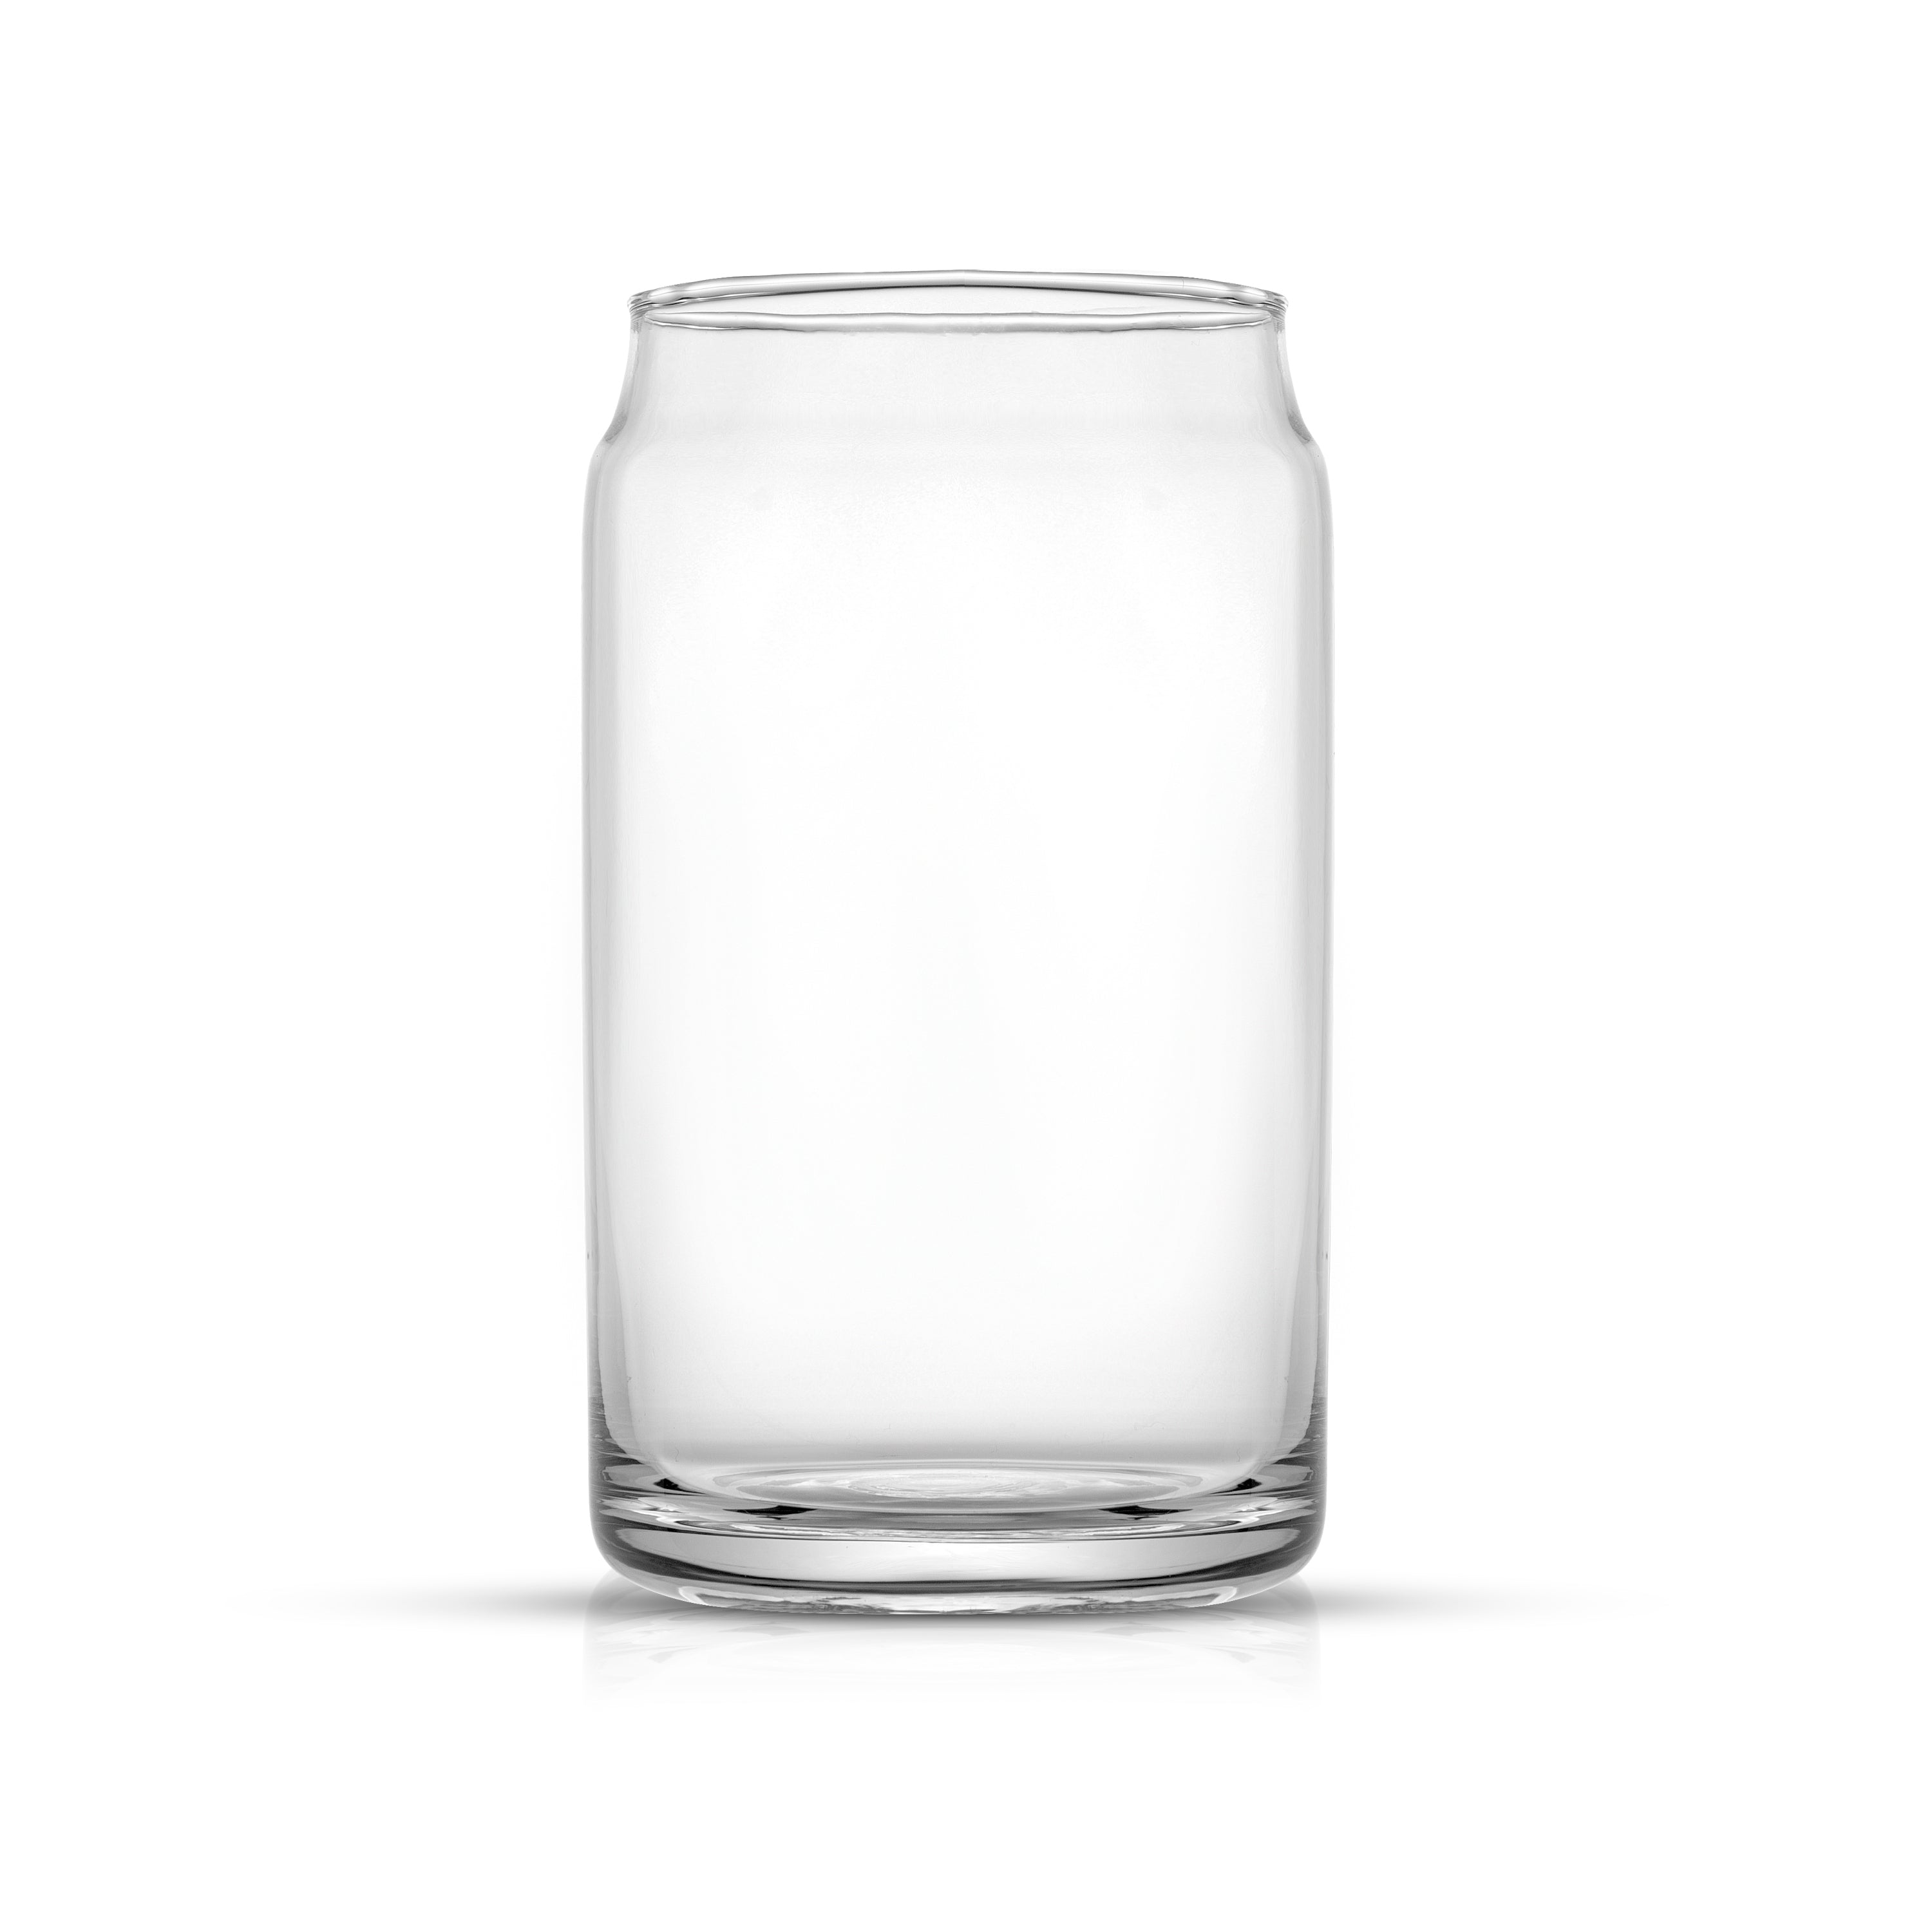 Classic Can Shape Tumbler Drinking Glass Cups - 17 oz - Set of 6